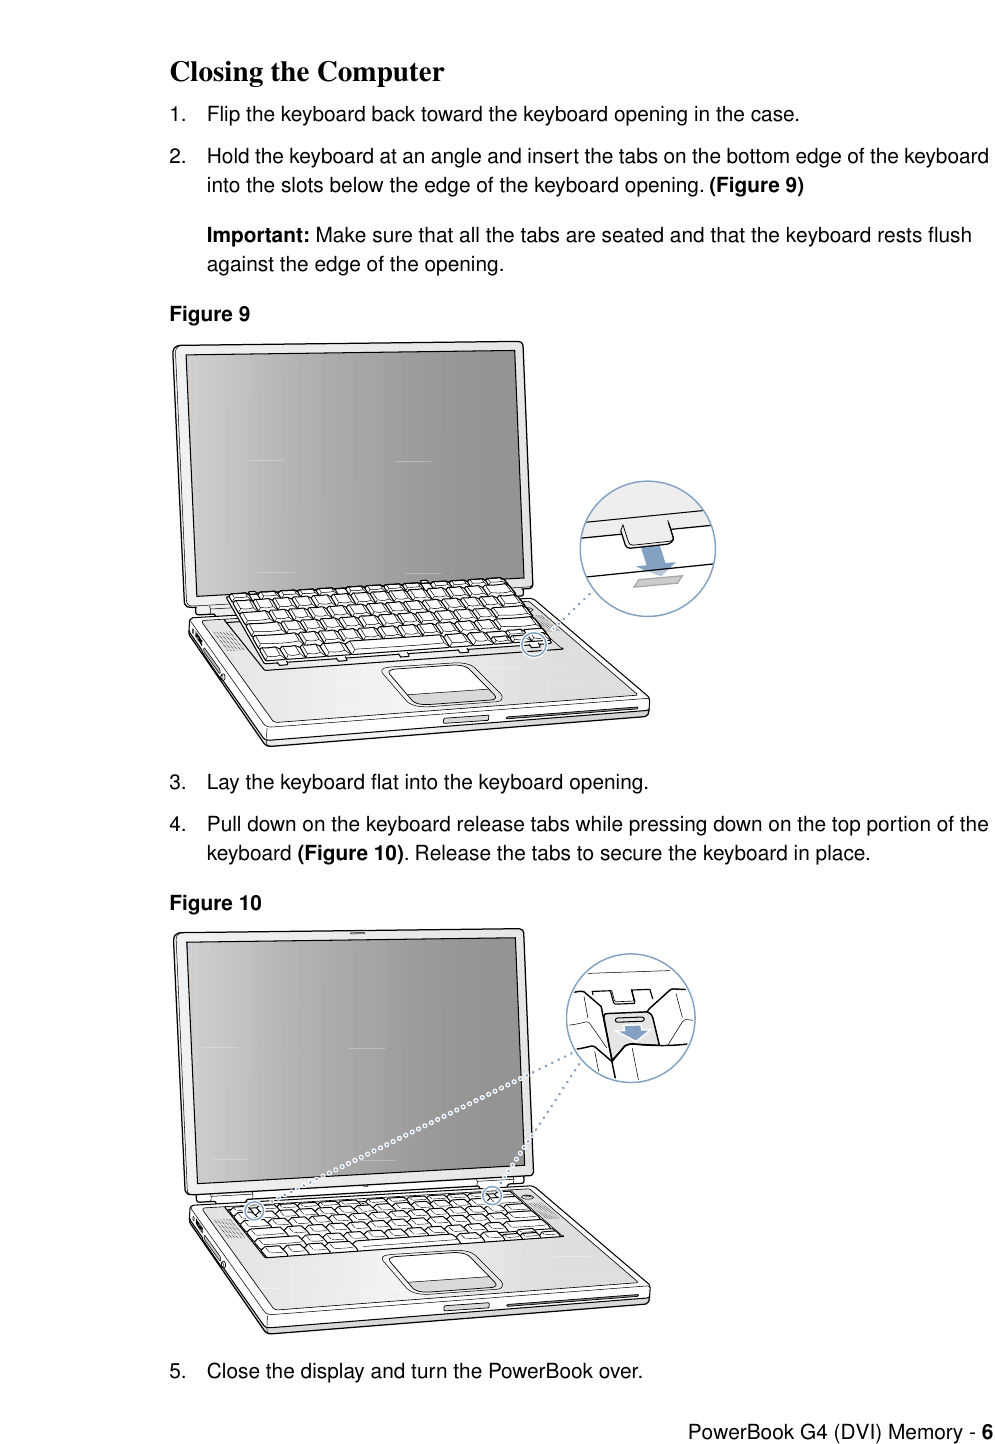 Page 6 of 7 - Apple PowerBook G4 (DVI) User Manual Power Book And (1GHz/867MHz) - Memory Card Replacement Instructions Pbg4dvi-mem-cip